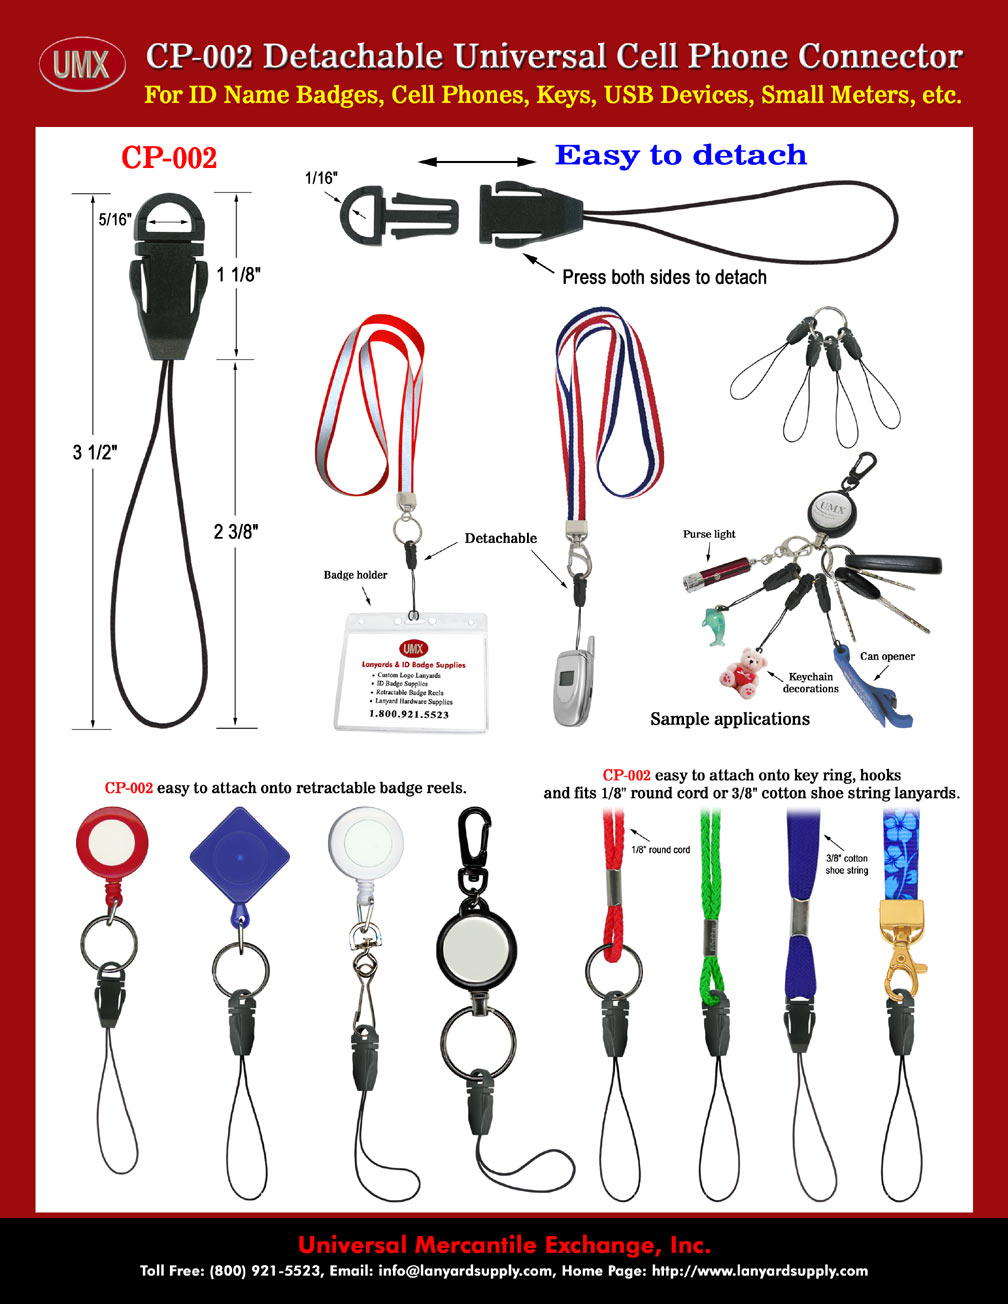 Detachable Universal String With Detachable Buckle For CellPhones, Name Badges, IDs, MP3 or USB.